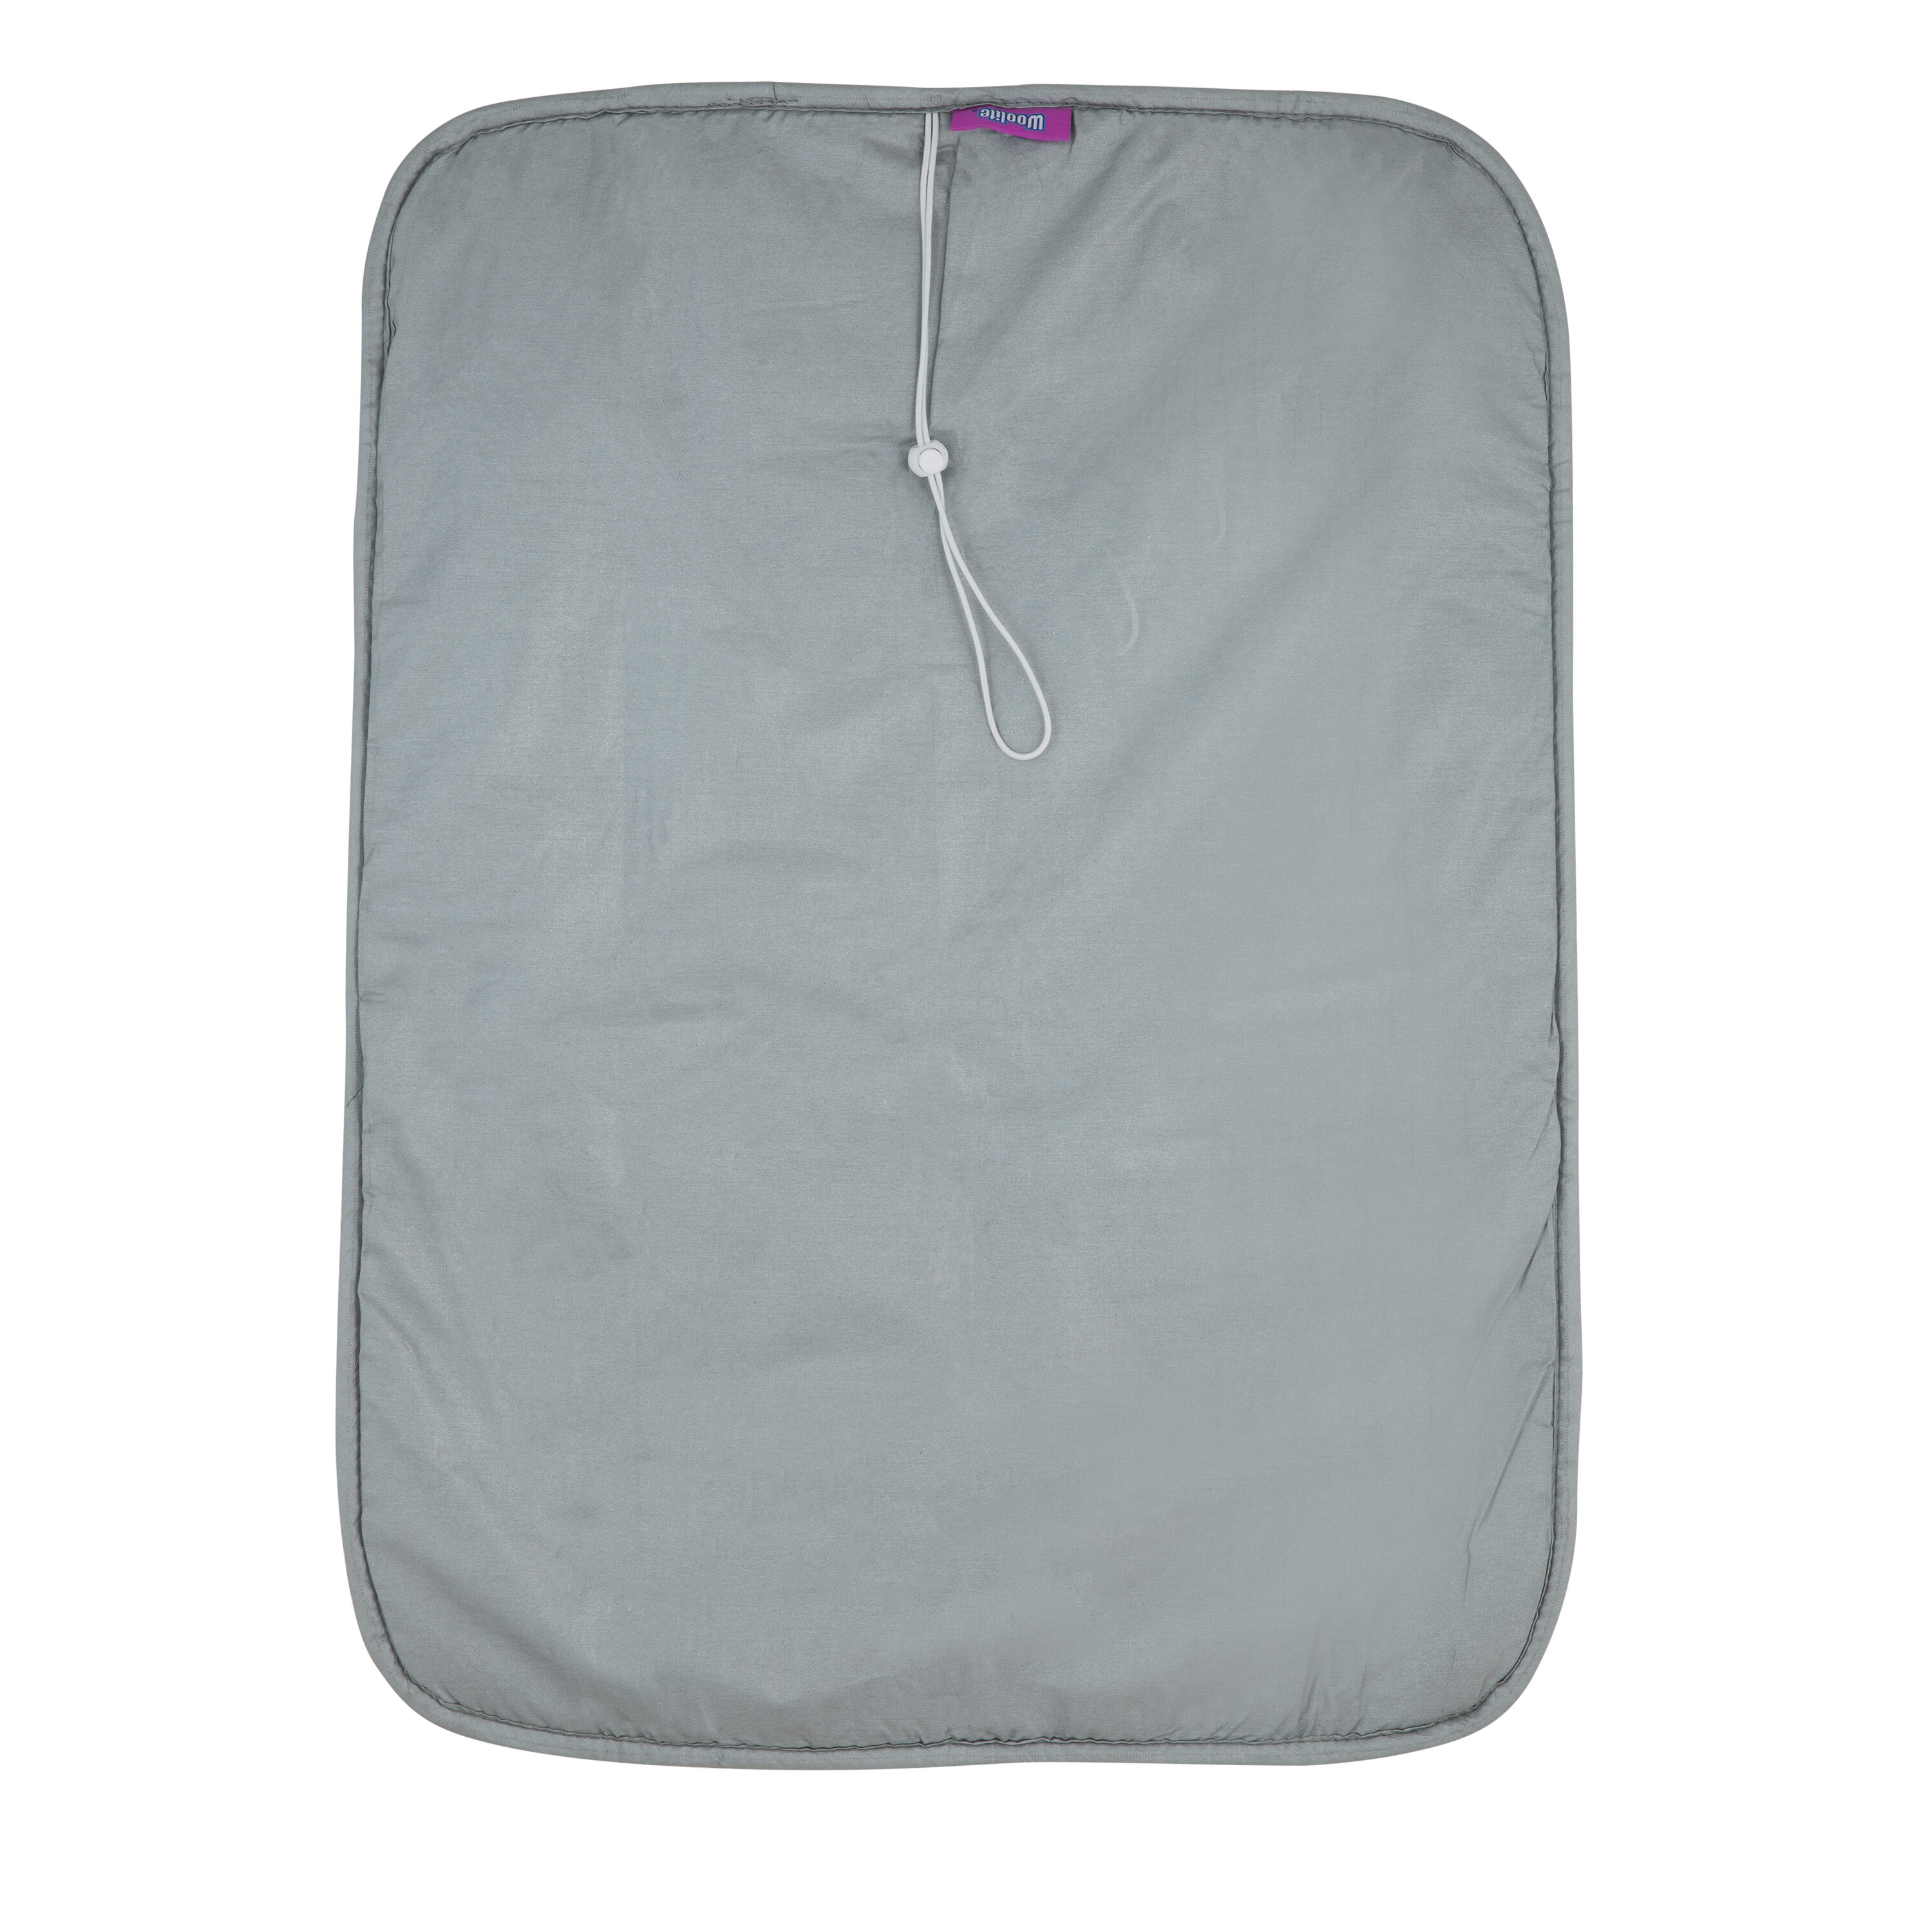 Premium Gray Wool Ironing Board Cover 24X60X1/8 - 7426933974811 Quilt in a  Day / Quilting Notions